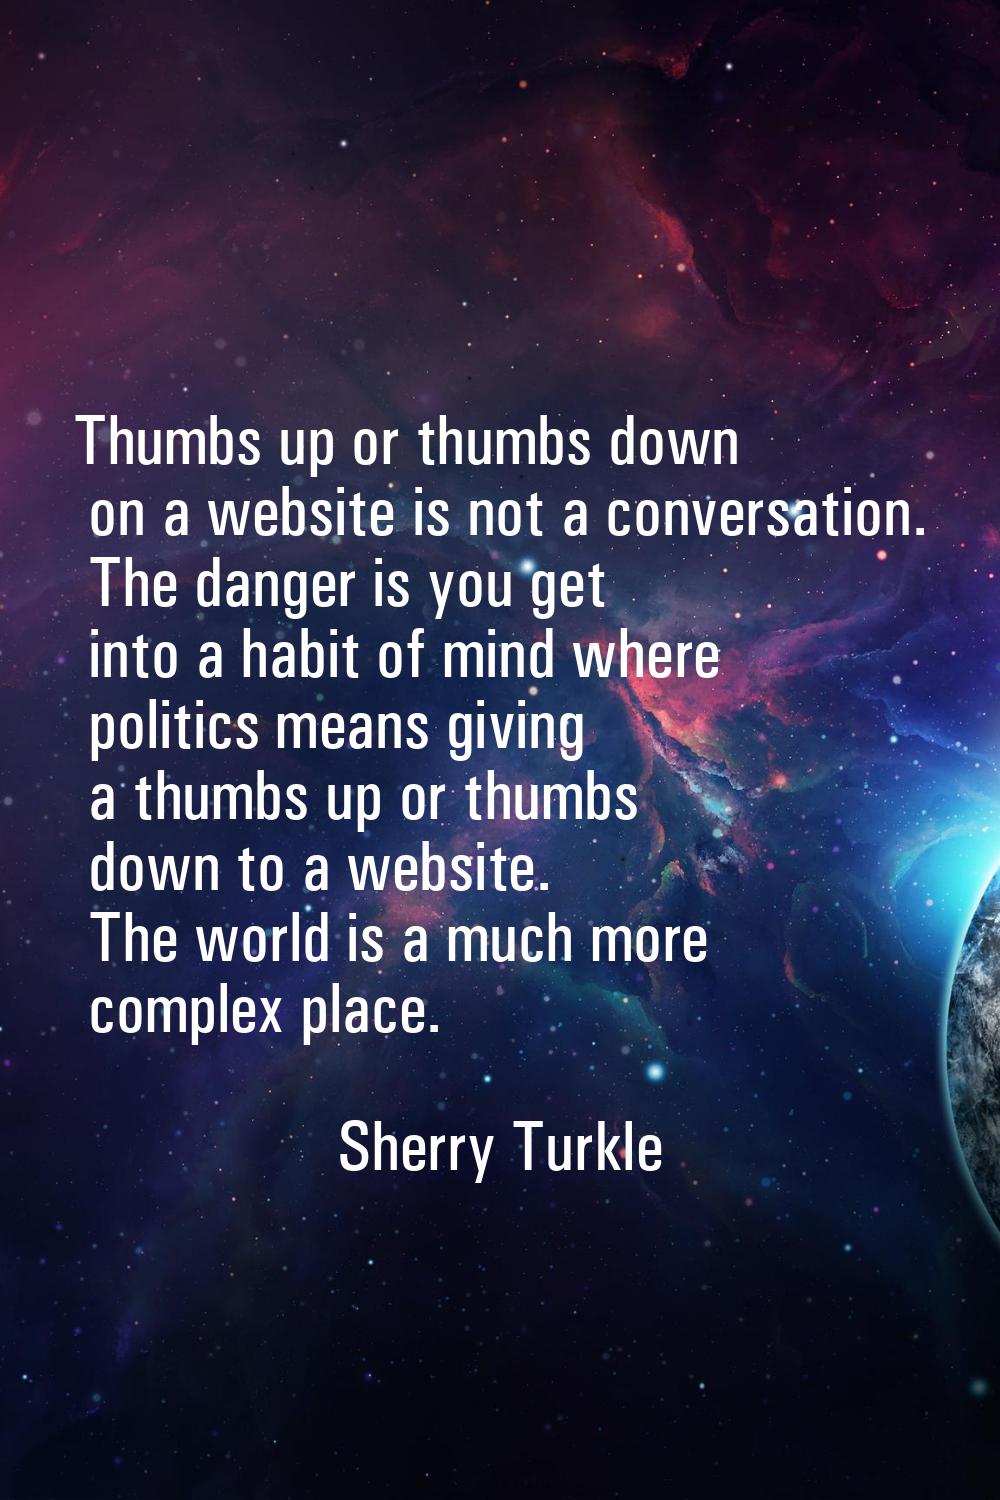 Thumbs up or thumbs down on a website is not a conversation. The danger is you get into a habit of 